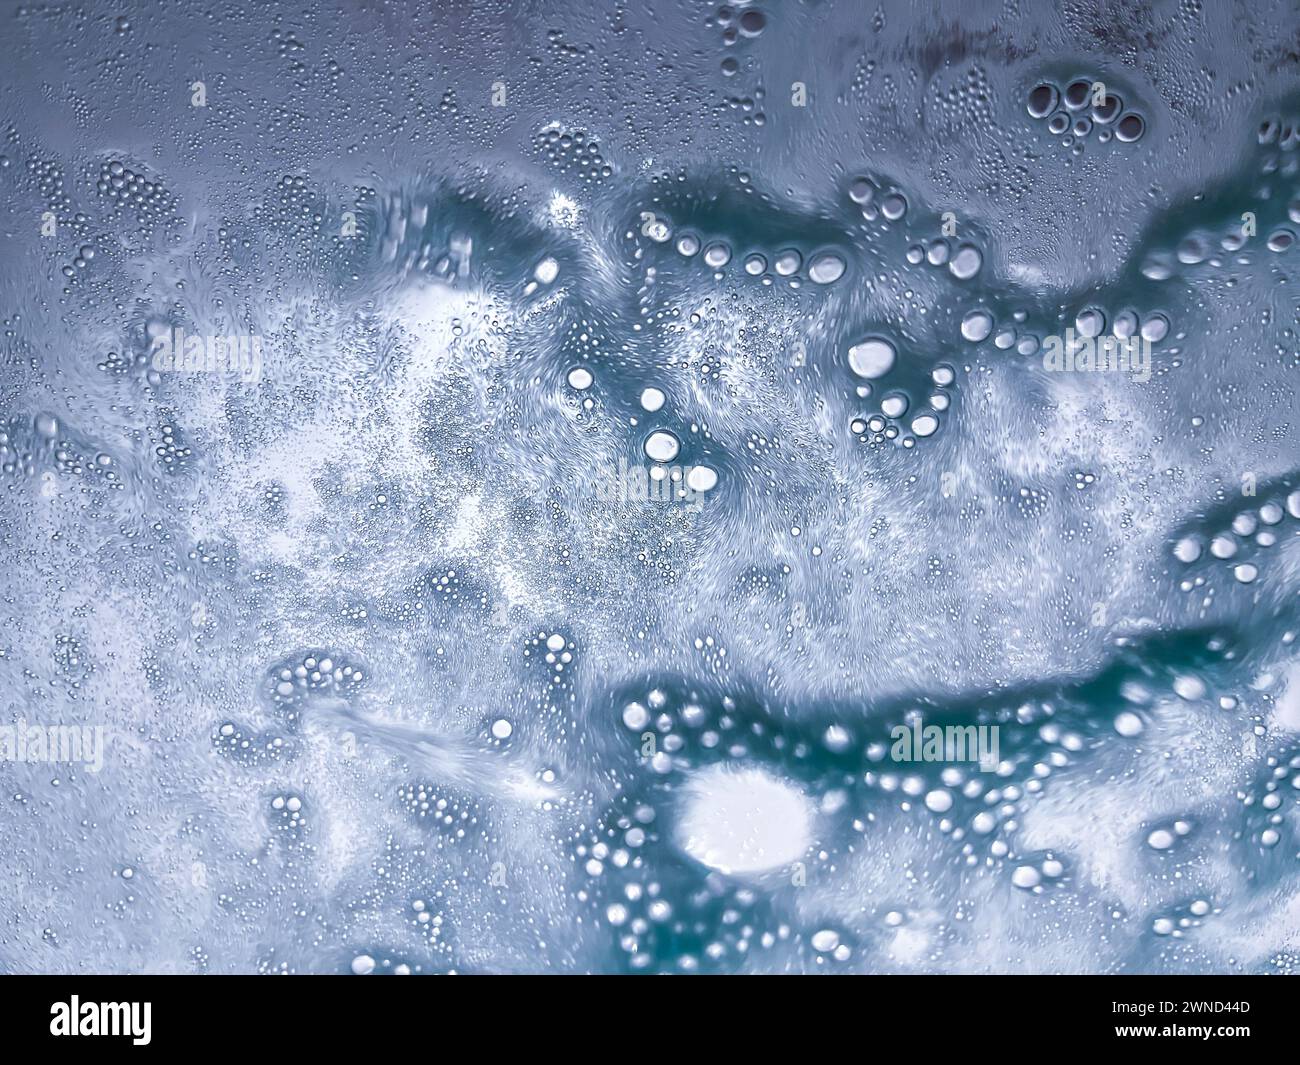 Abstract texture background of water and suds spraying on the windshield of a vehicle in an automated car wash Stock Photo